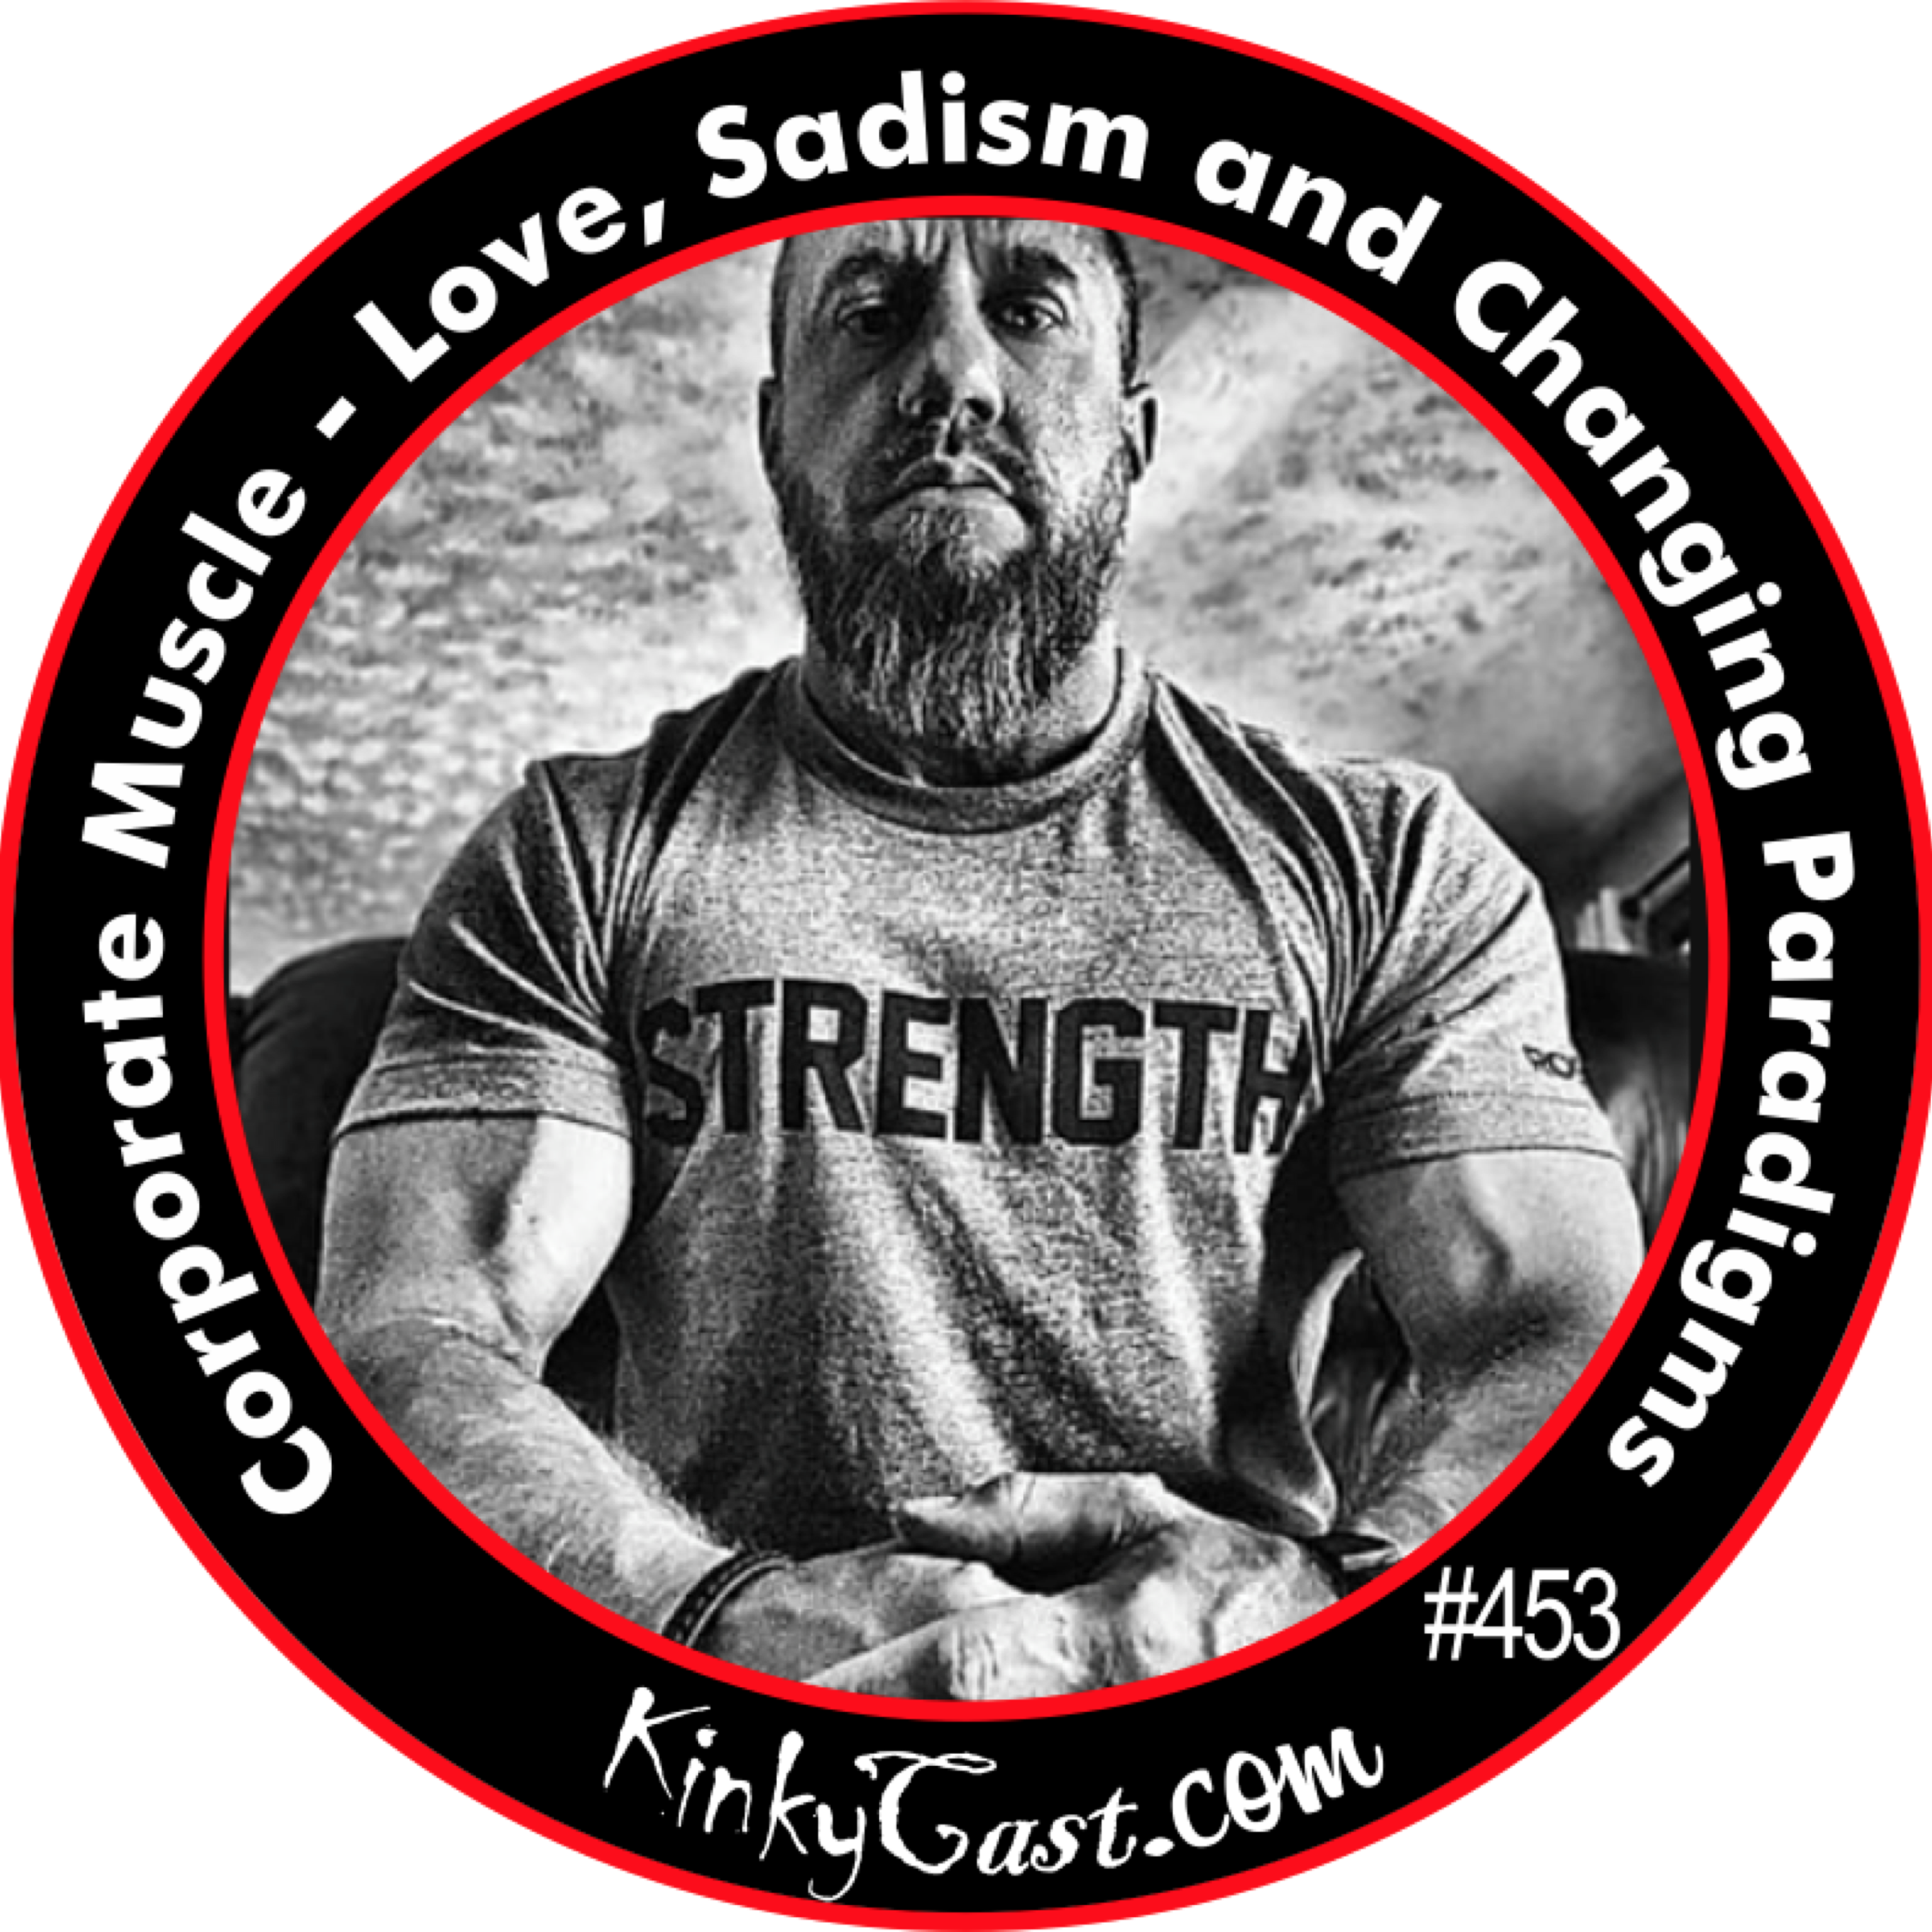 #453 - Corporate Muscle - Love, Sadism, and Changing Paradigms